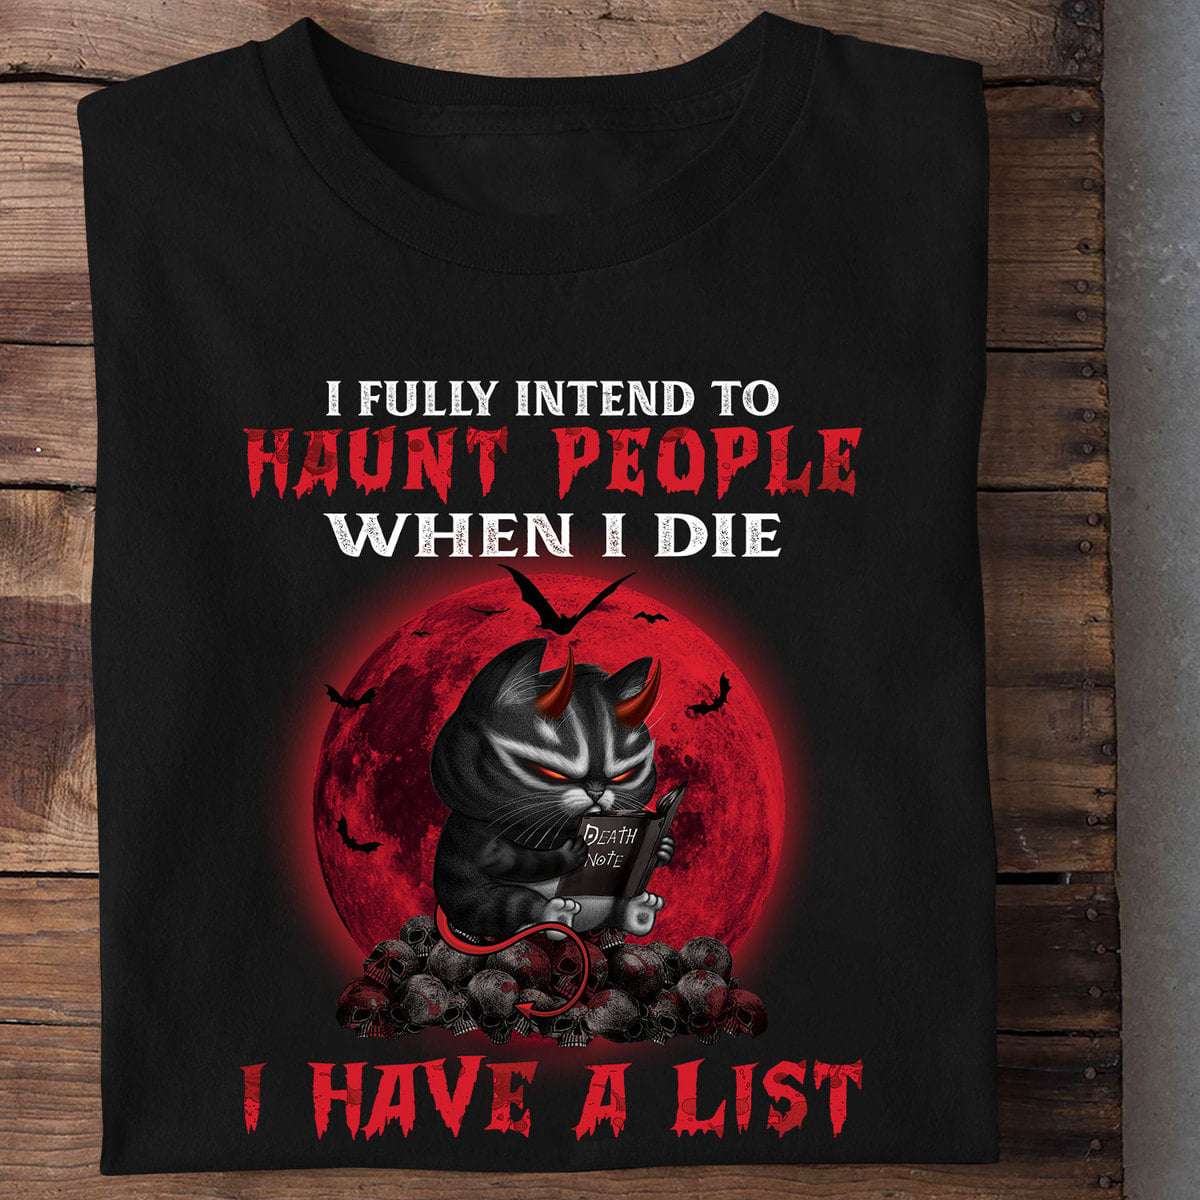 I fully intend to haunt people when I die I have a list - Evil cat with death note